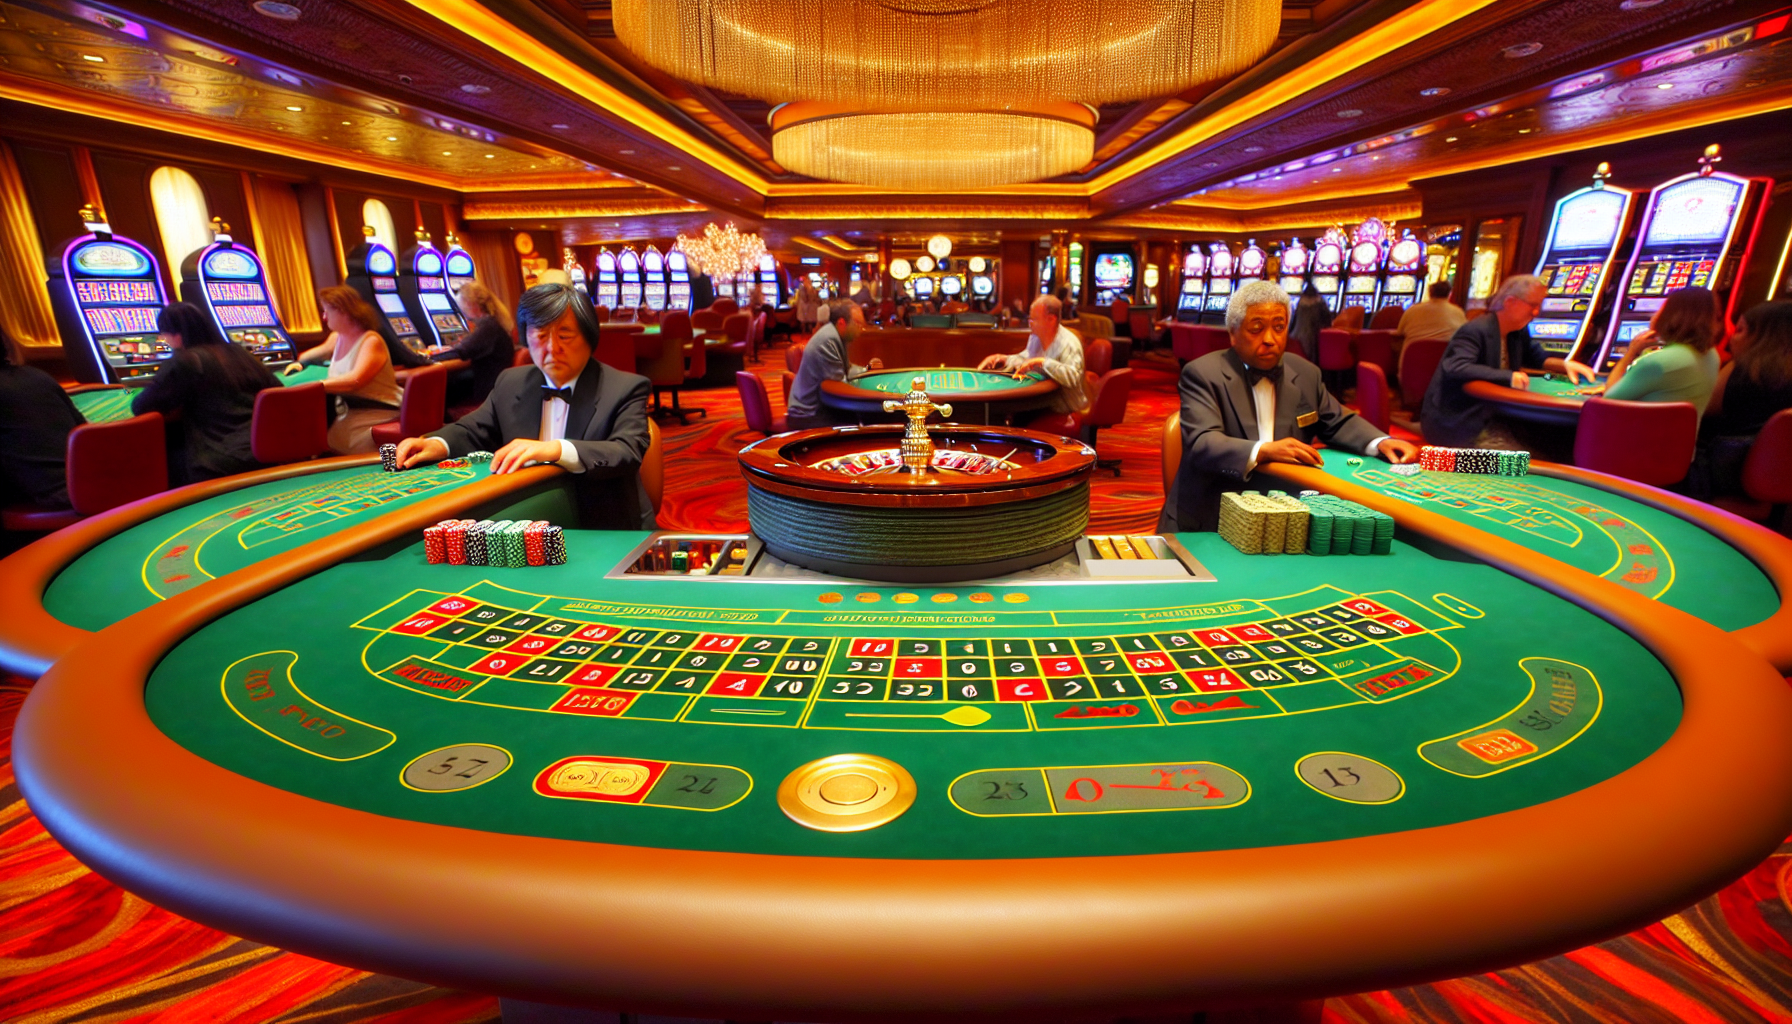 Elegant blackjack and roulette tables at a casino